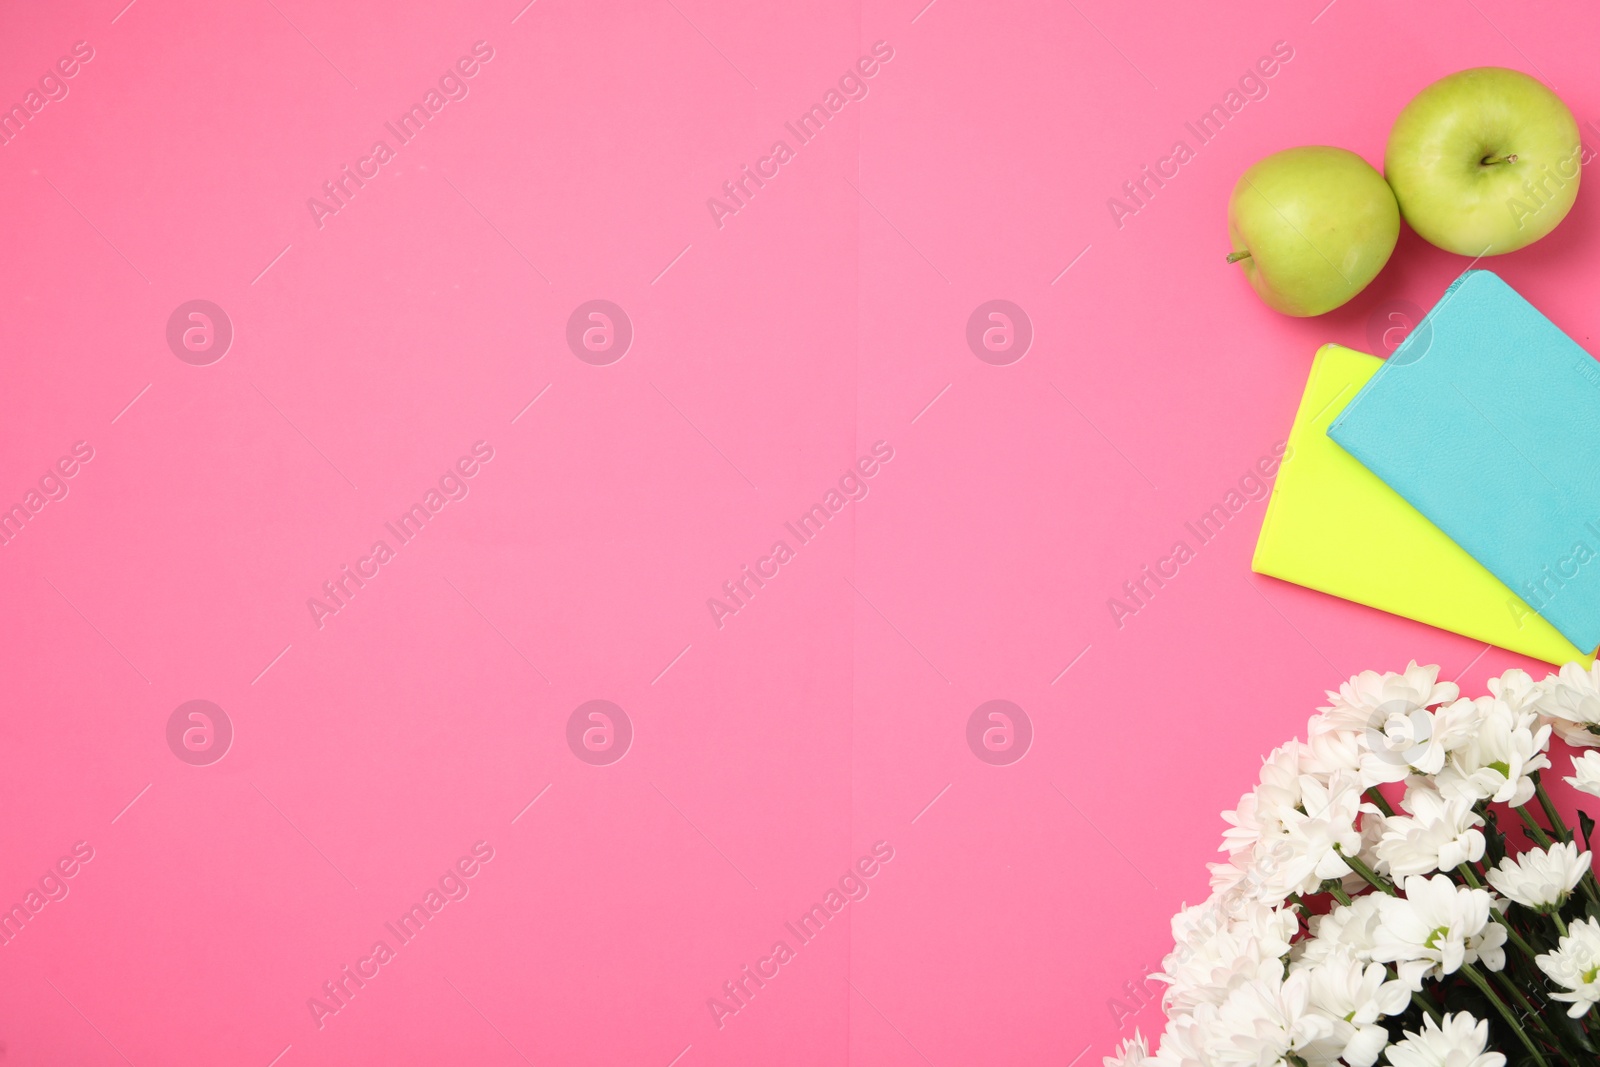 Photo of White chrysanthemum flowers, notebooks and apples on pink background, flat lay with space for text. Teacher's day